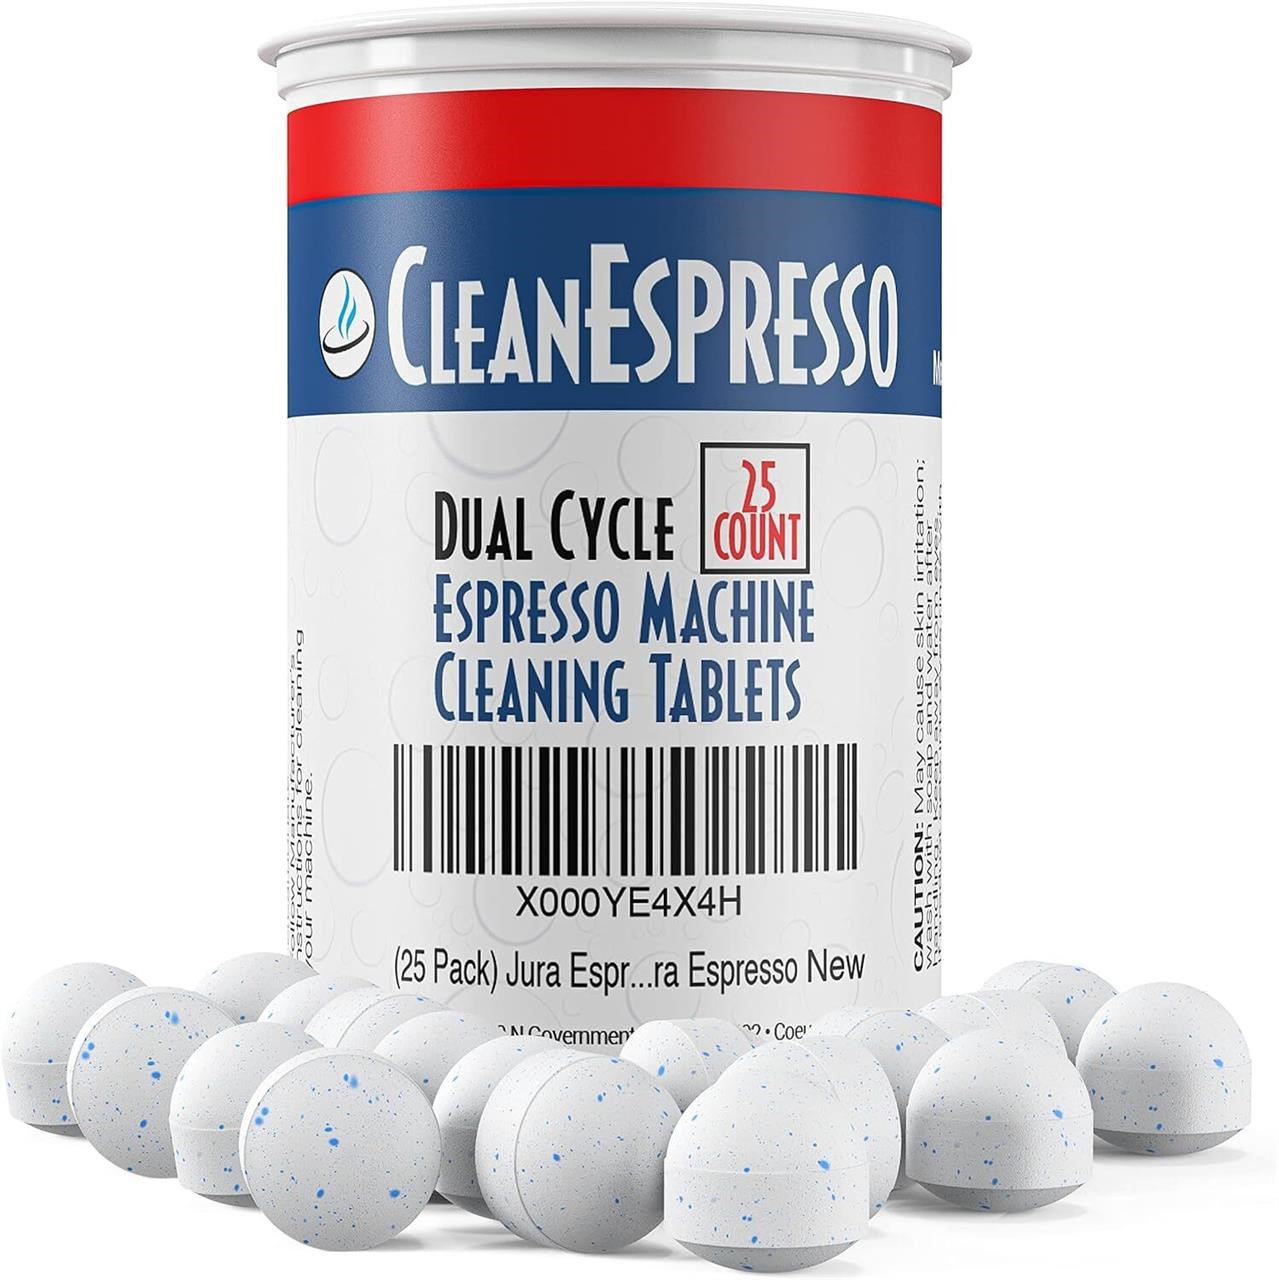 Espresso Machine Cleaning Tablets (25 Count) Jura